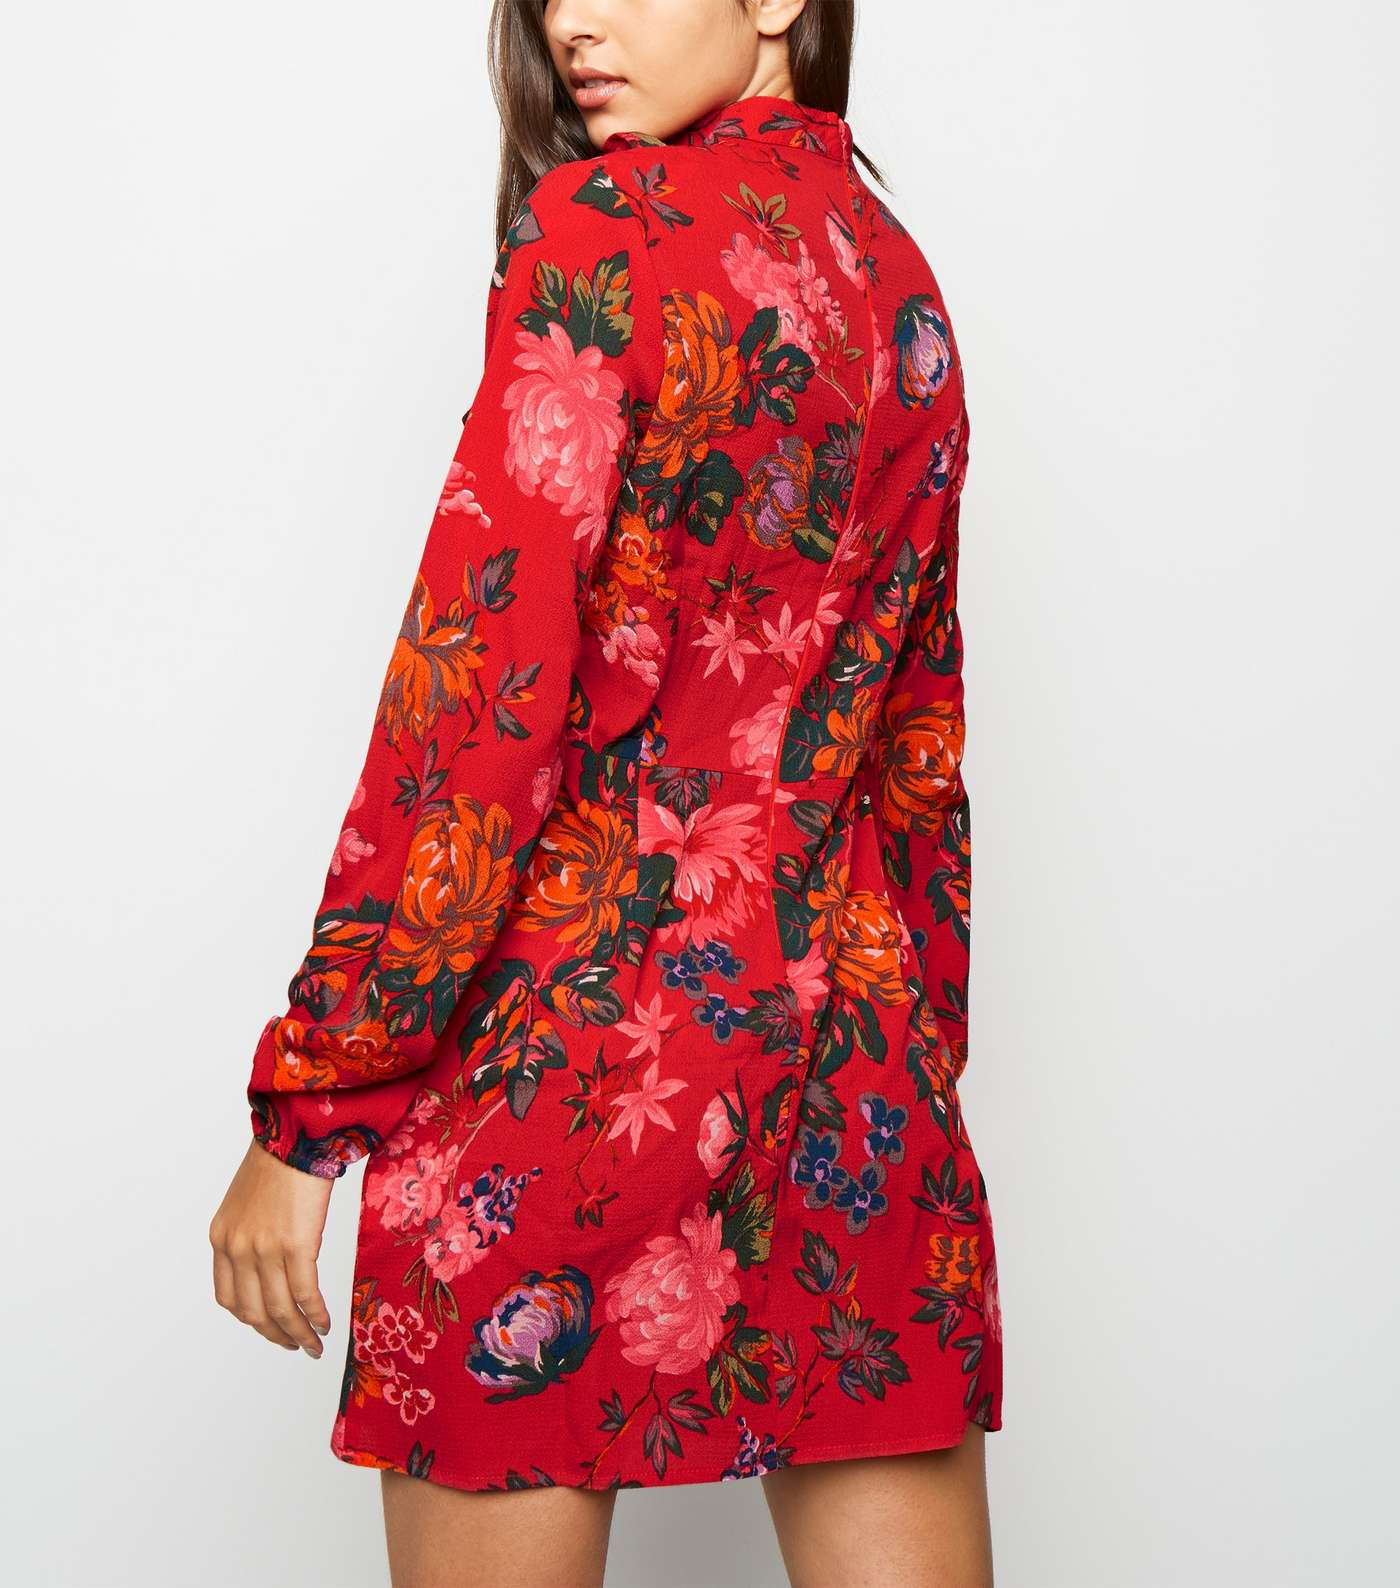 AX Paris Red Floral Print Frill Front Dress Image 3